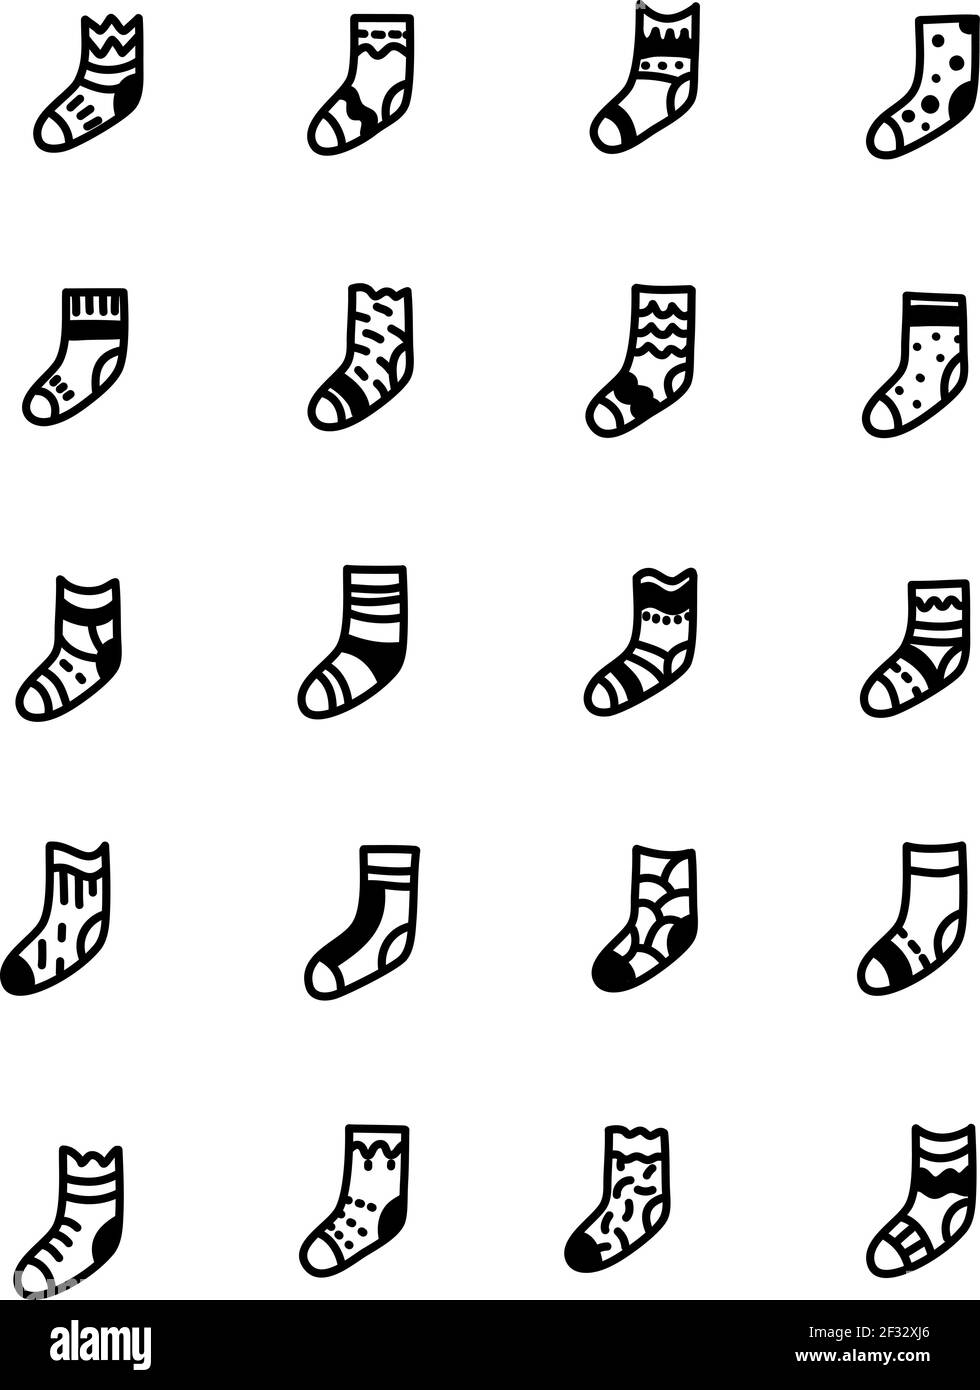 Decorative black and white socks, illustration, vector on a white background Stock Vector